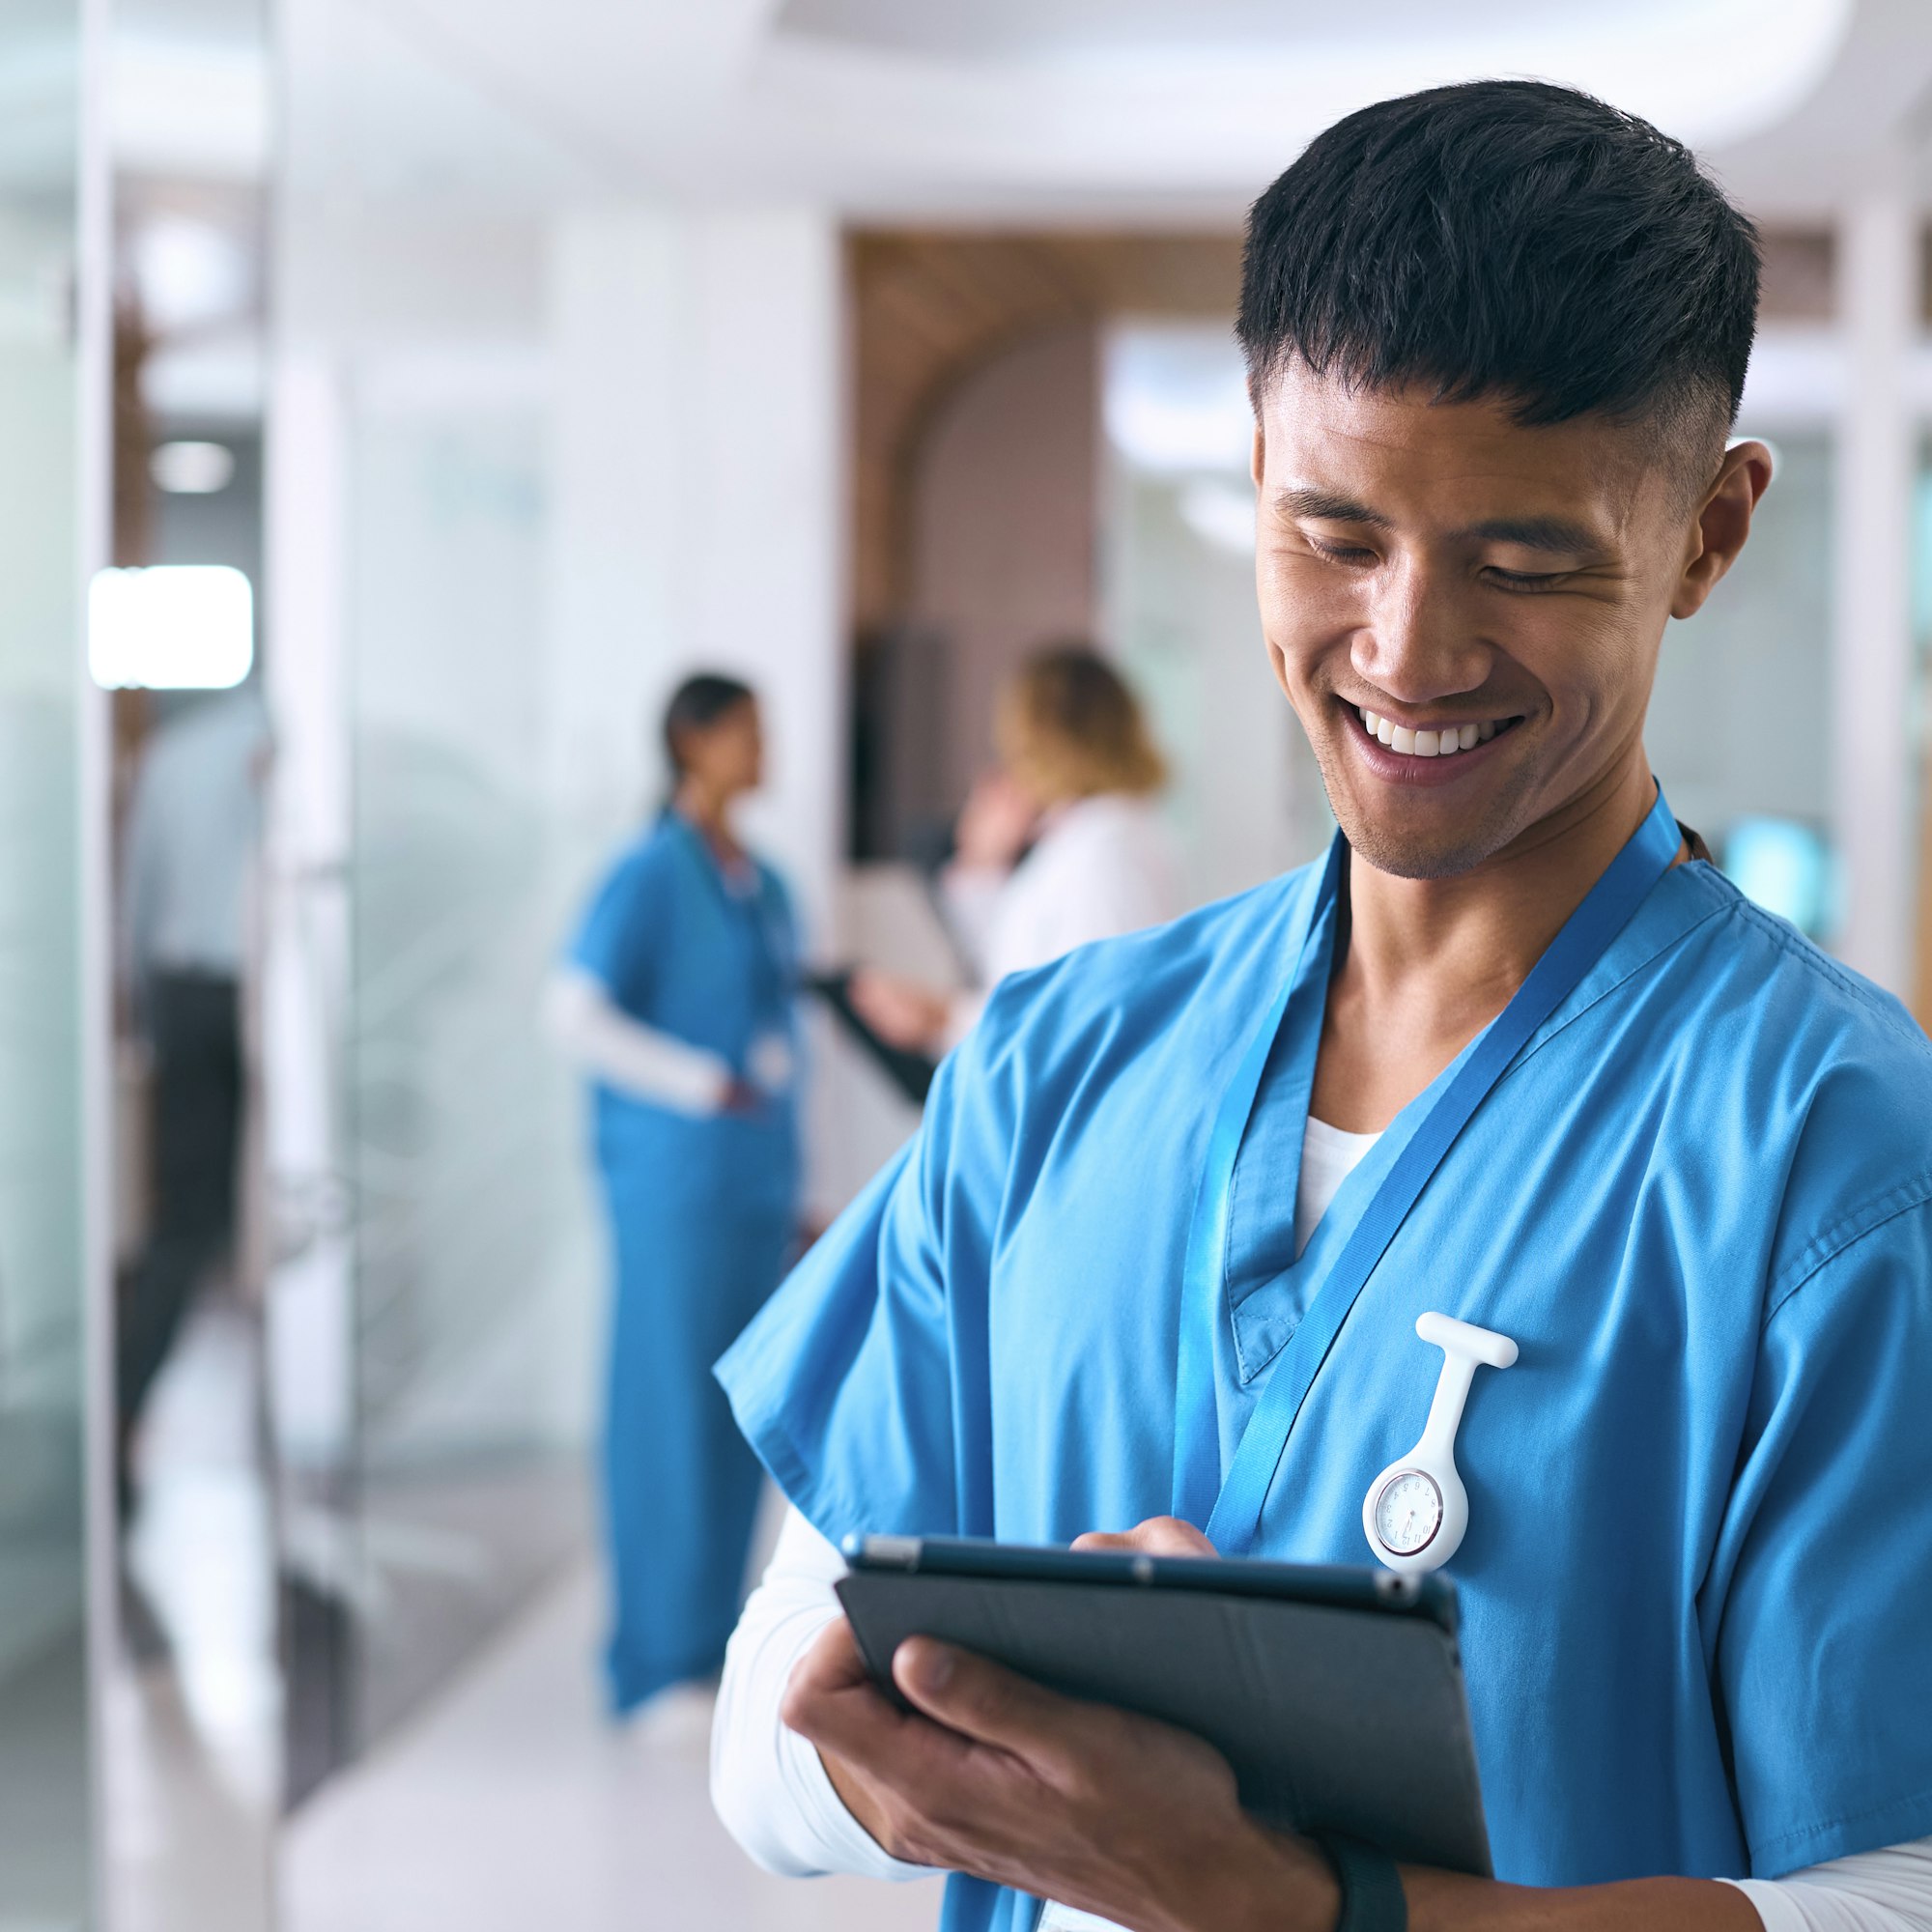 Male Doctor Or Nurse Wearing Scrubs With Digital Tablet Checking Patient Notes In Hospital